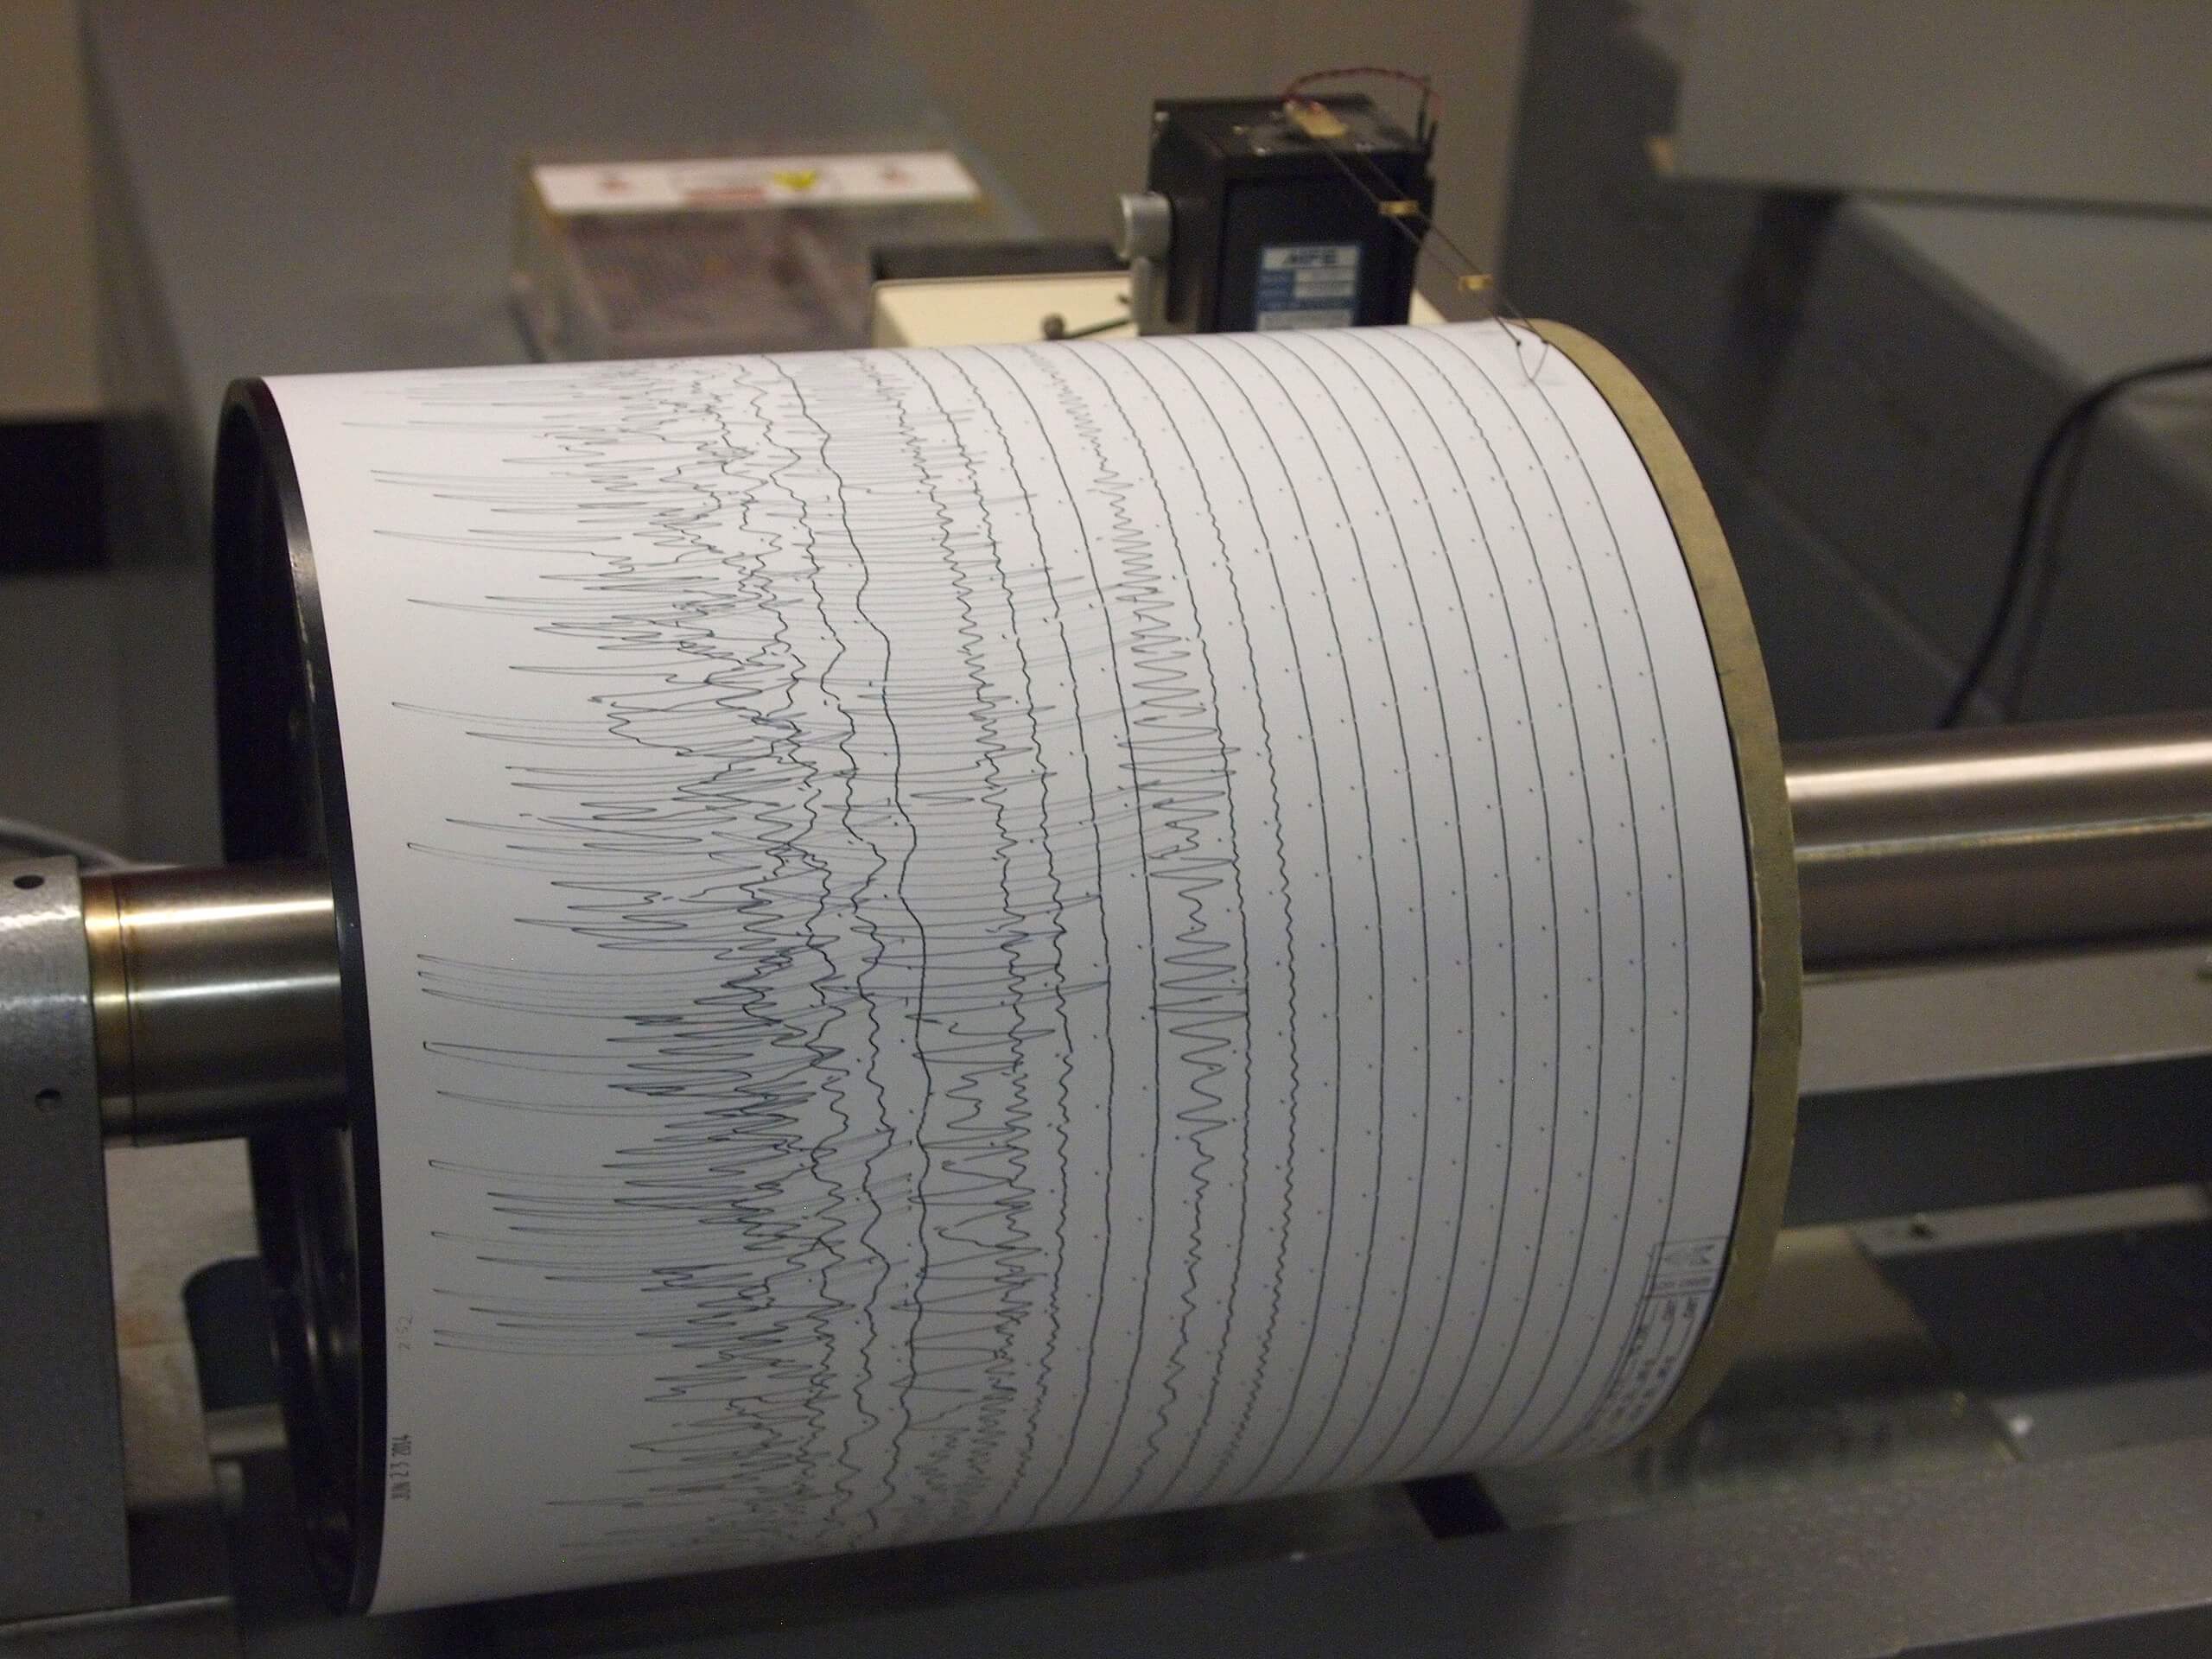 A photograph of a seismometer recording seismic waves as a series of zig-zag lines.